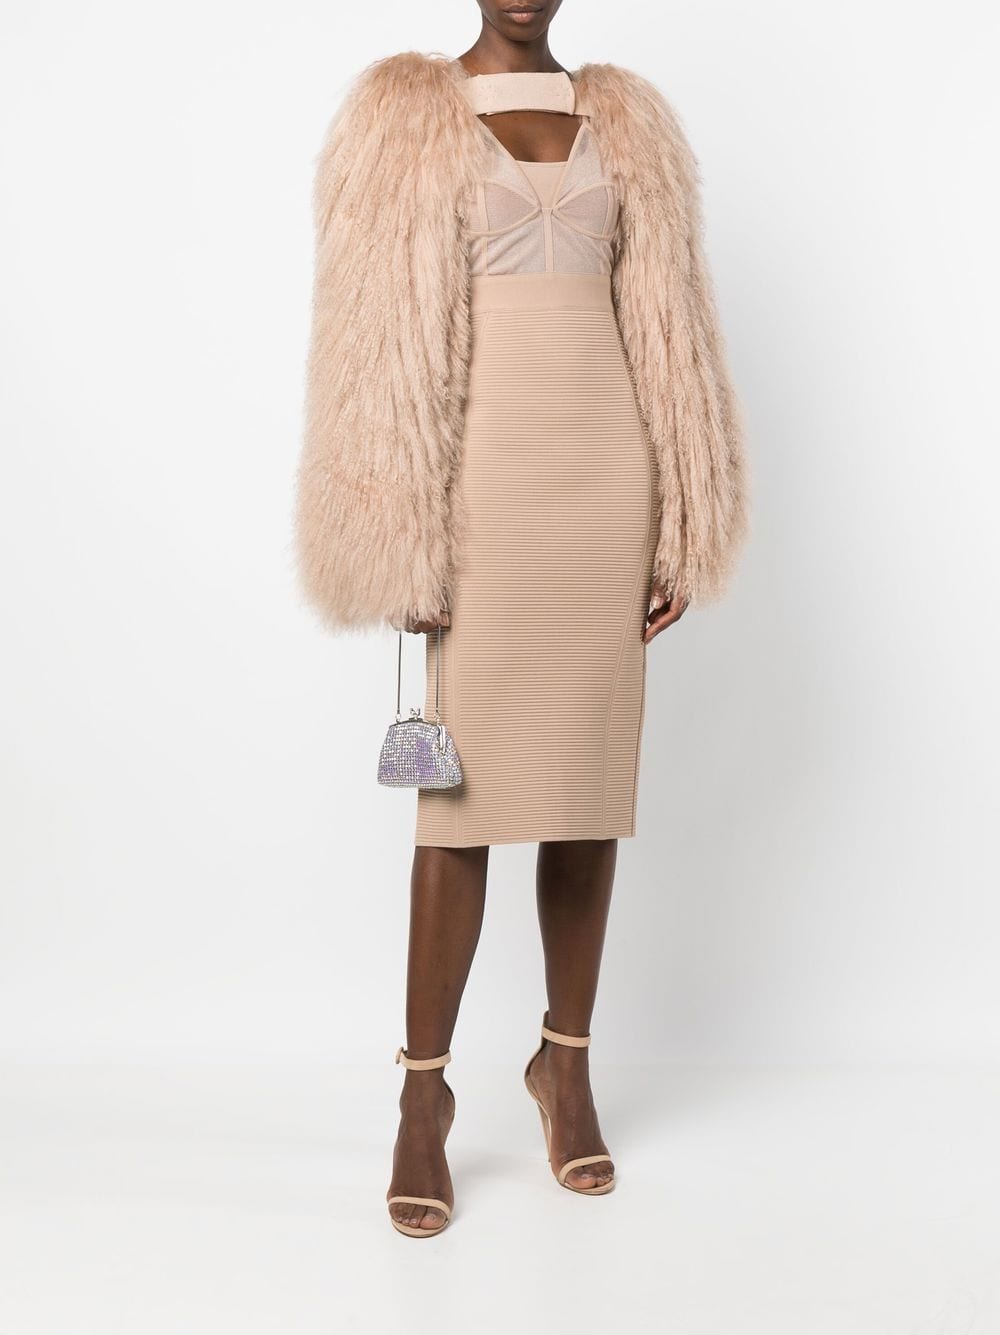 detailing, front and jacket cropped, faux-fur sleeved touch-strap long from powder sleeves fastening, ANDREADAMO bolero featuring faux-fur